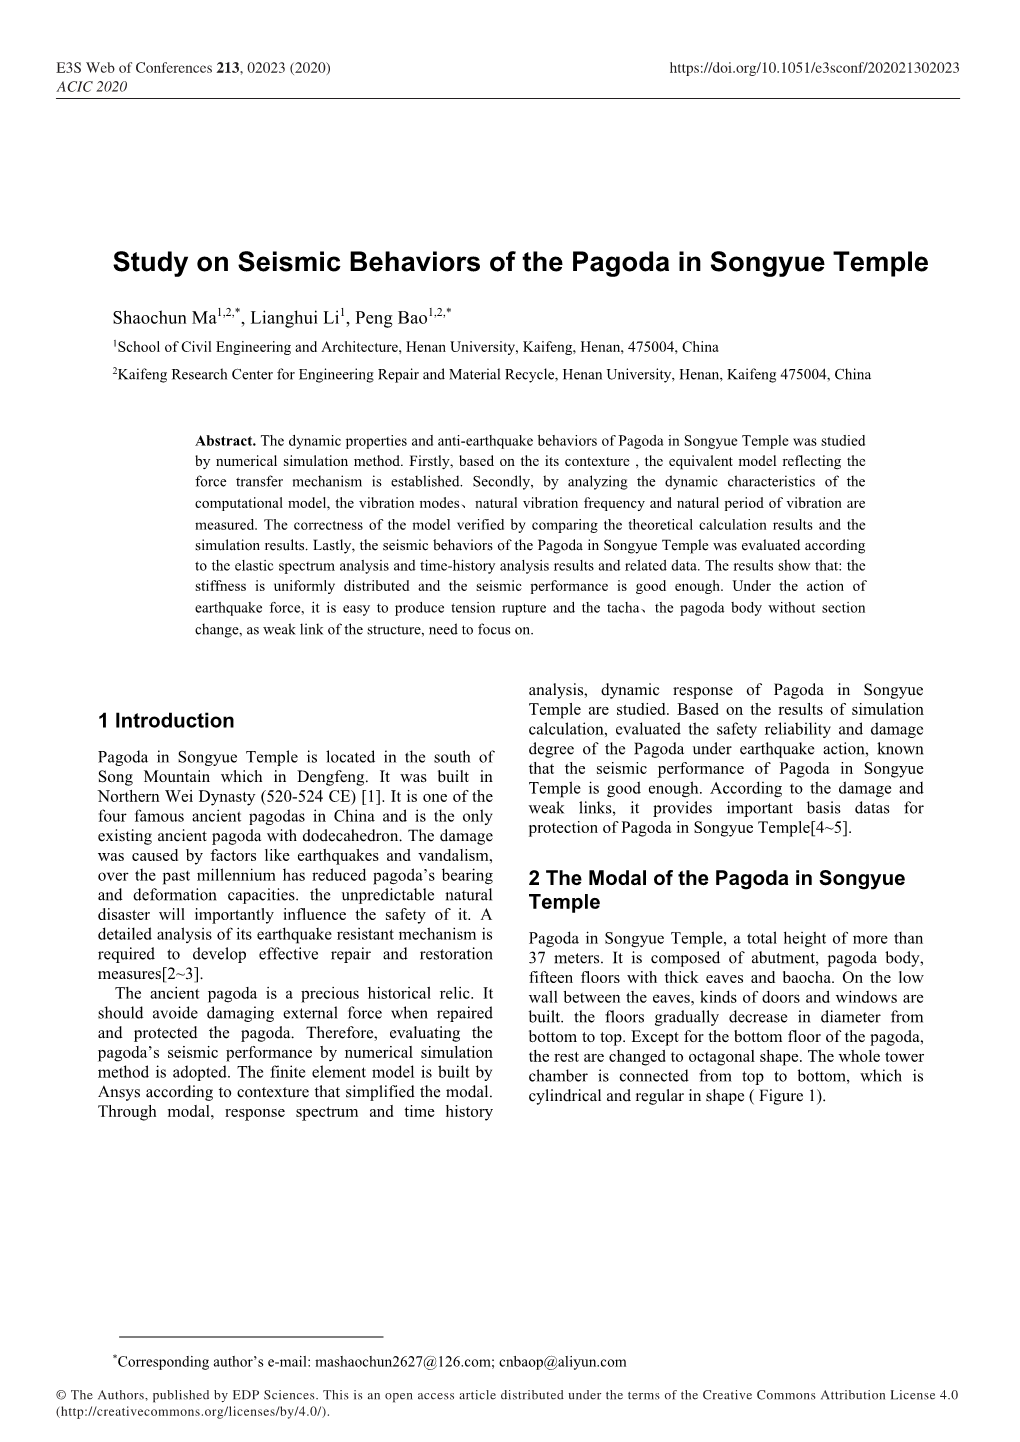 Study on Seismic Behaviors of the Pagoda in Songyue Temple